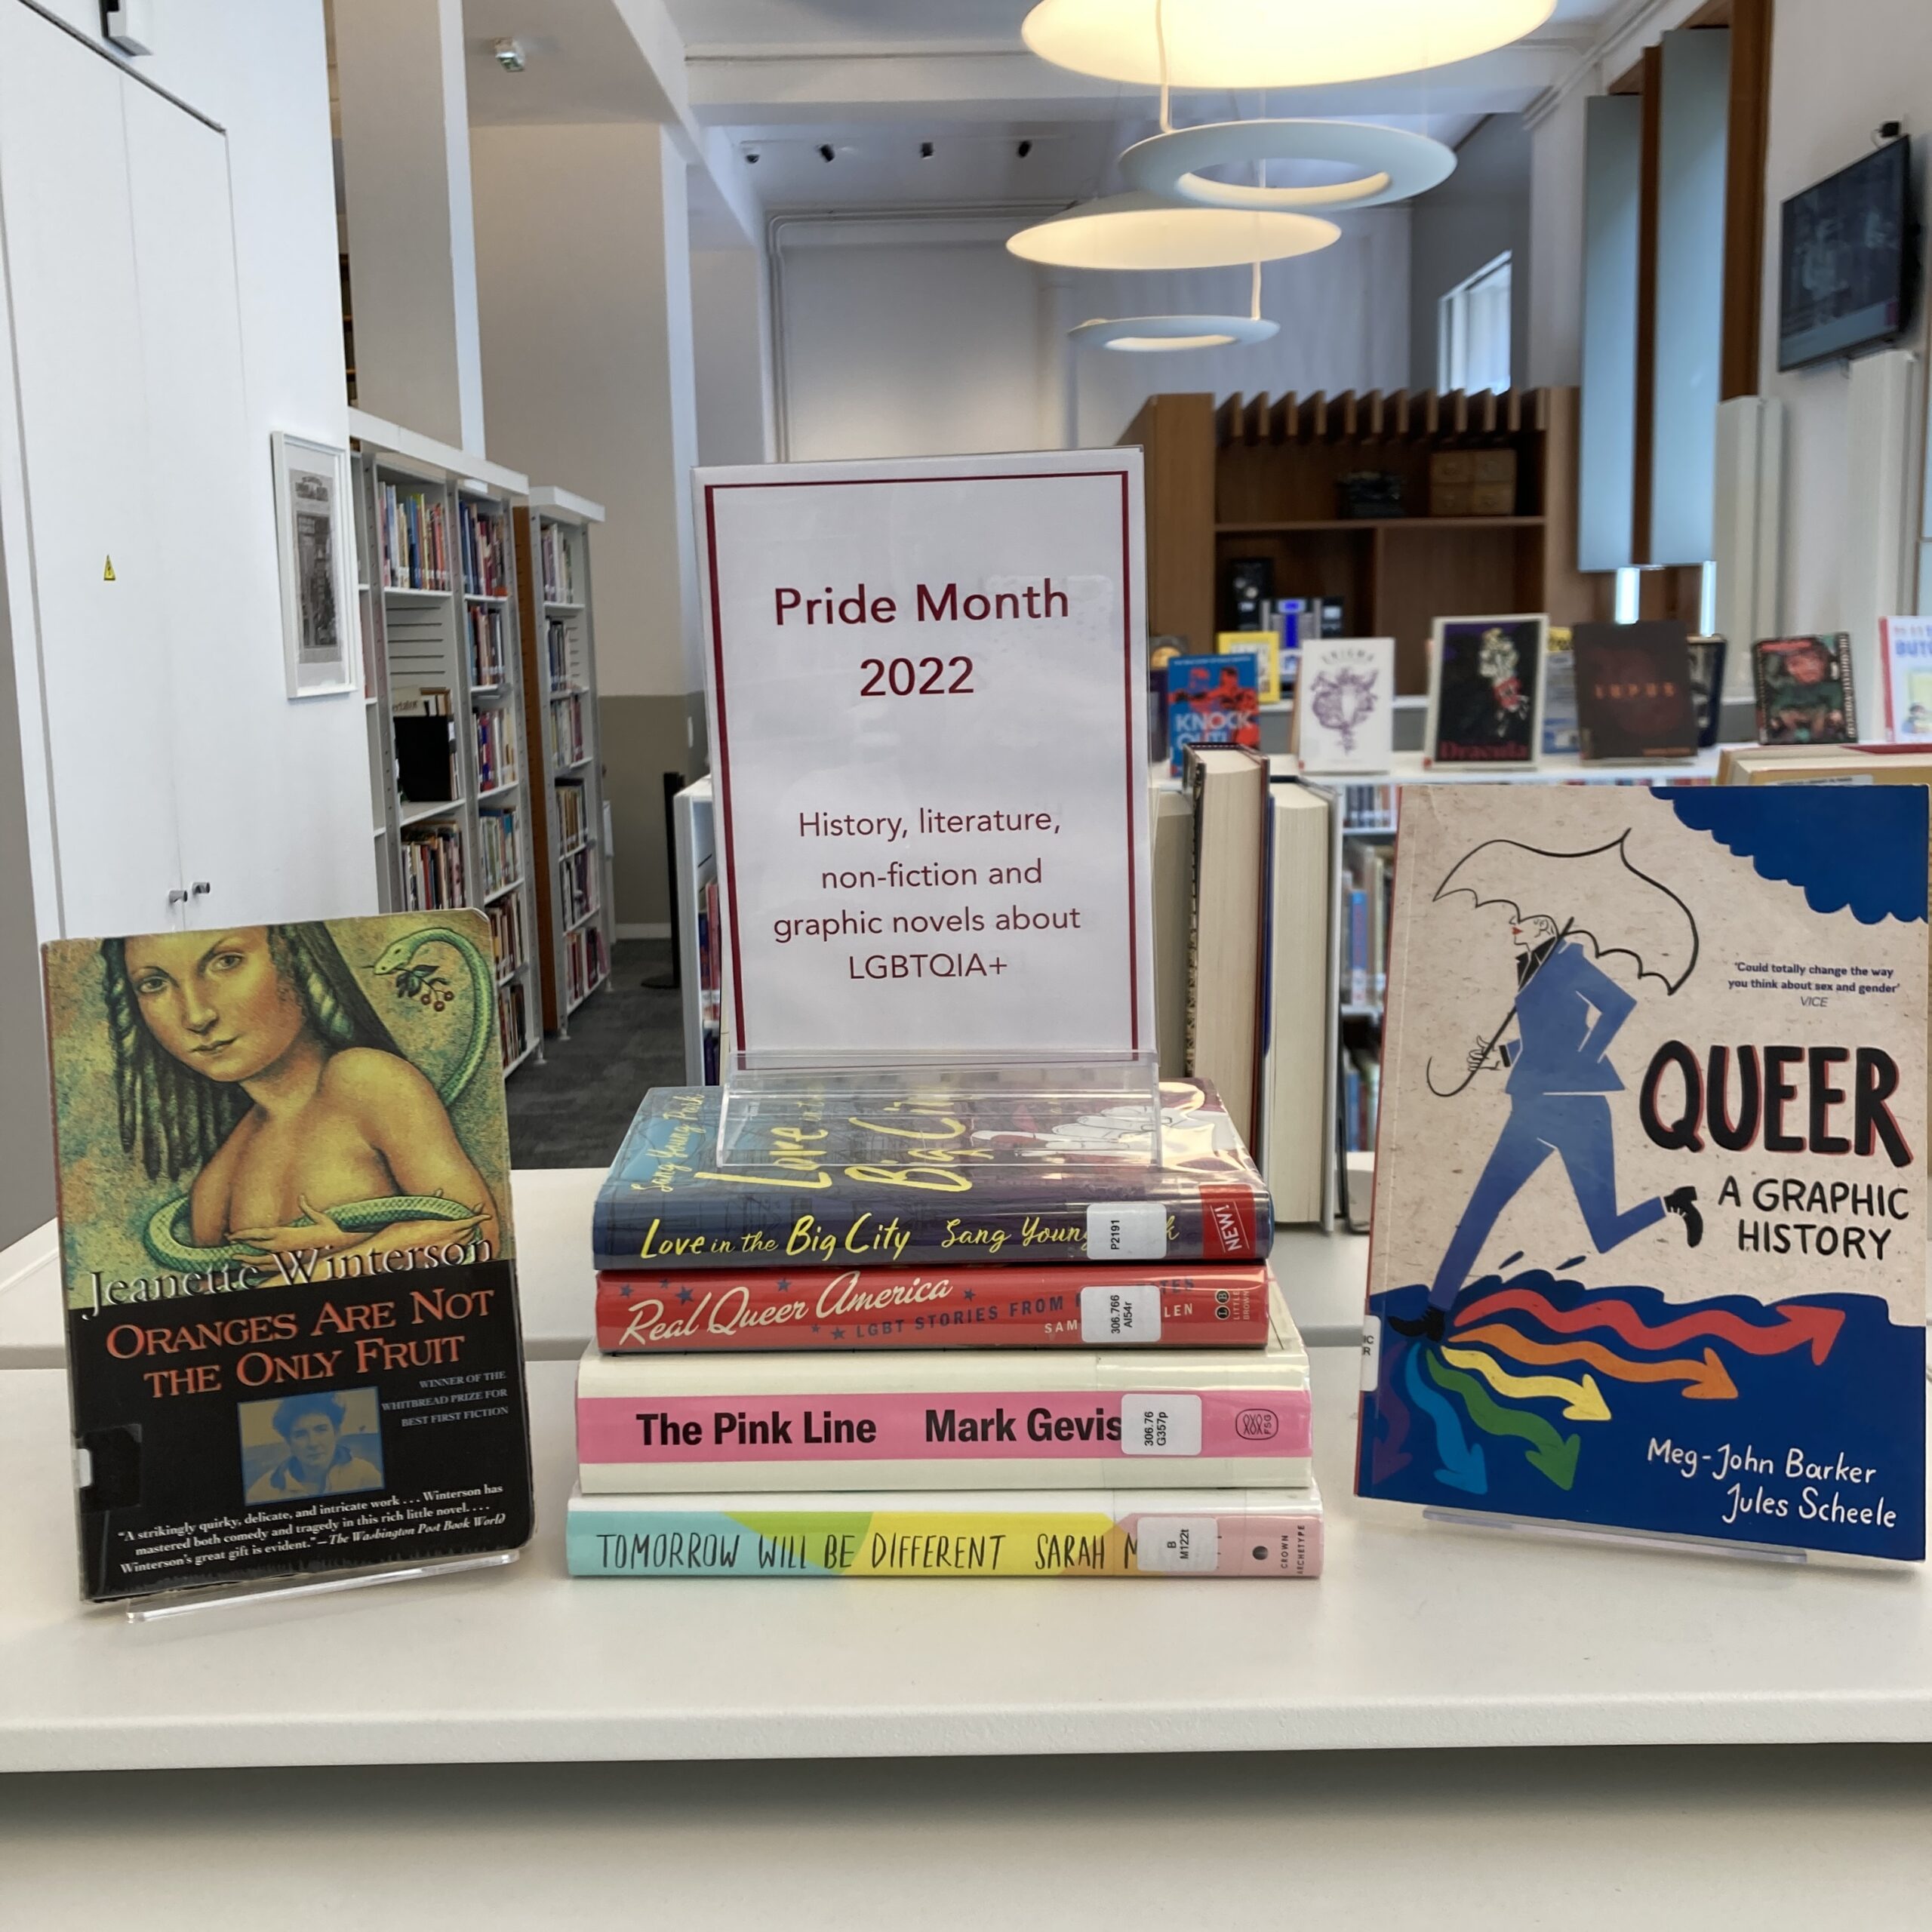 Stack of books relating to Pride Month 2022 - history, literature, non-fiction and graphic novels